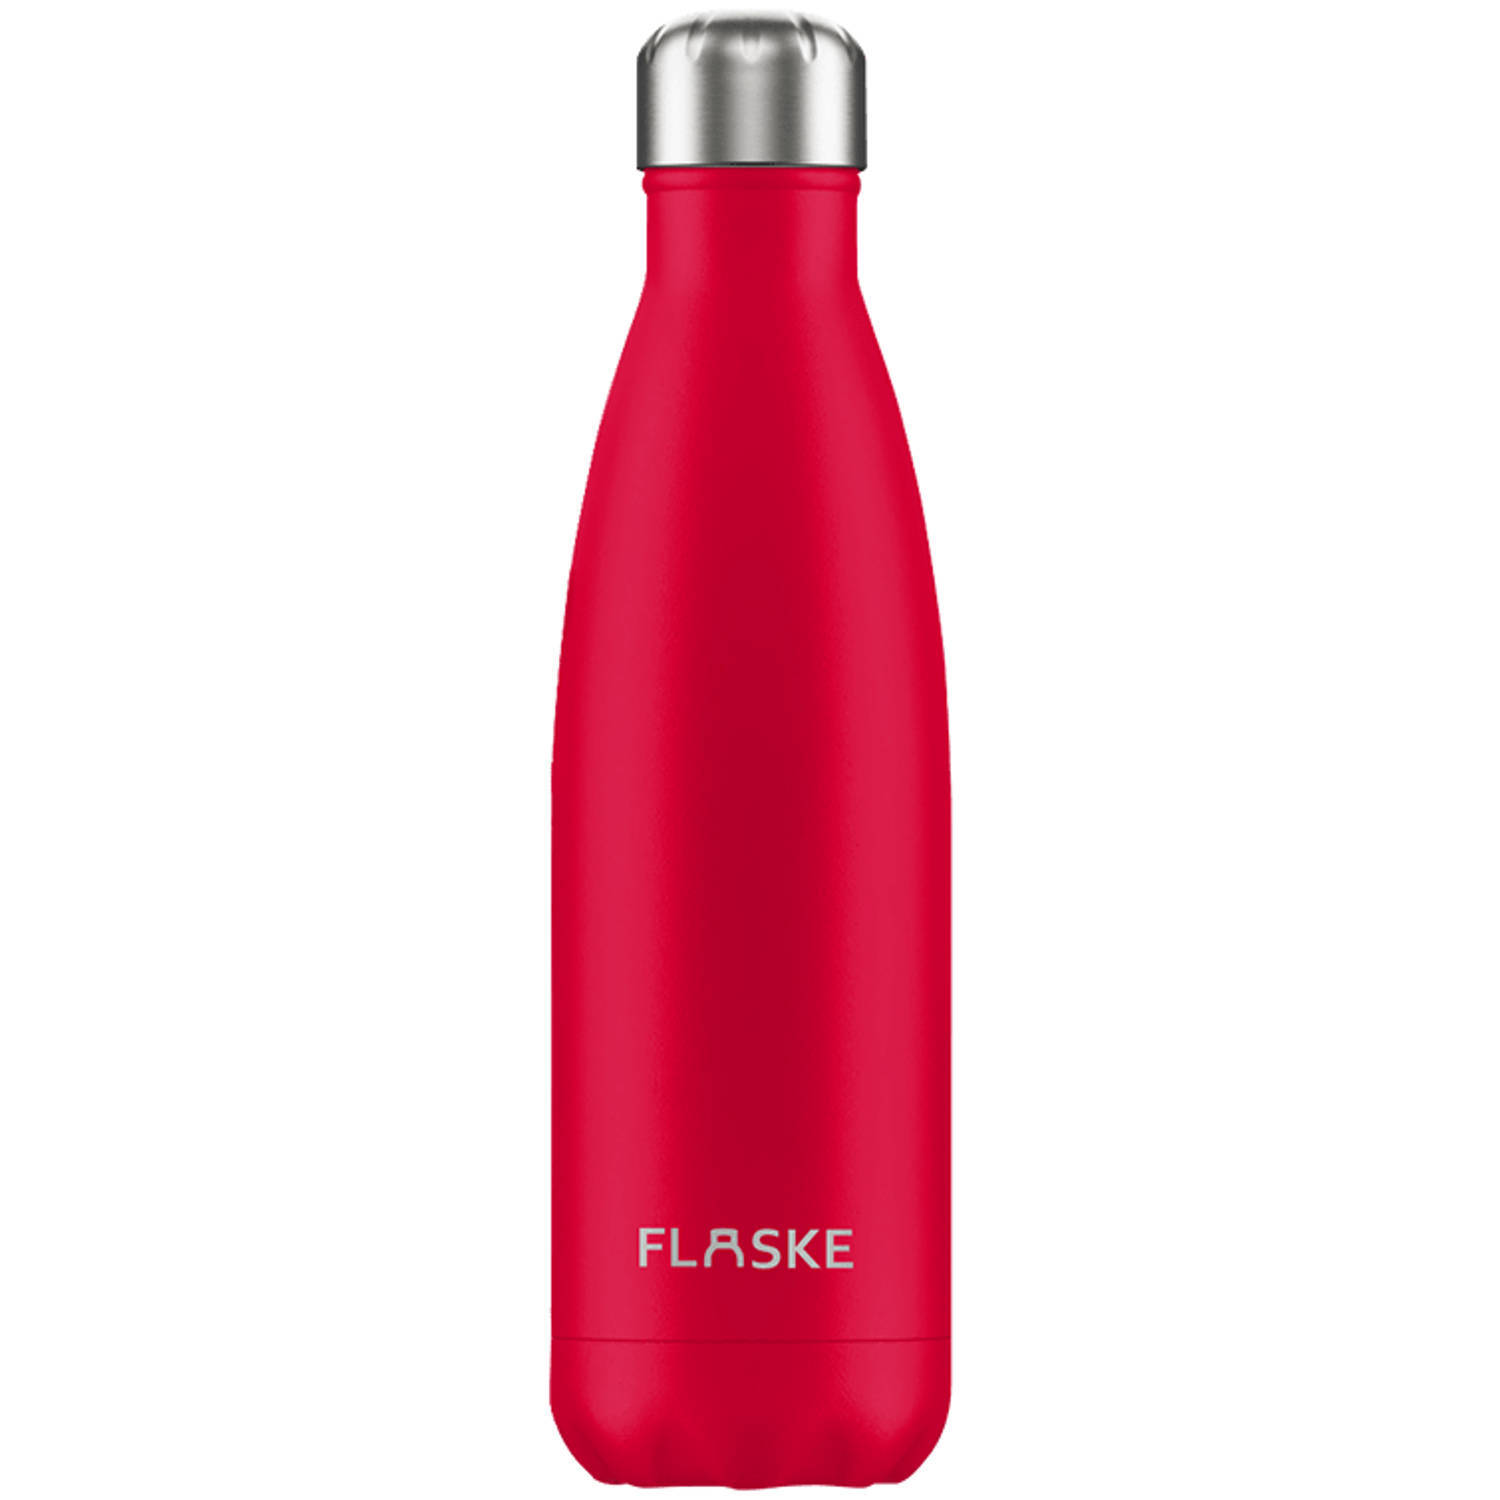 FLASKE Chilly RVS Thermosfles - 500ml - Drinkfles - Waterfles - Thermofles